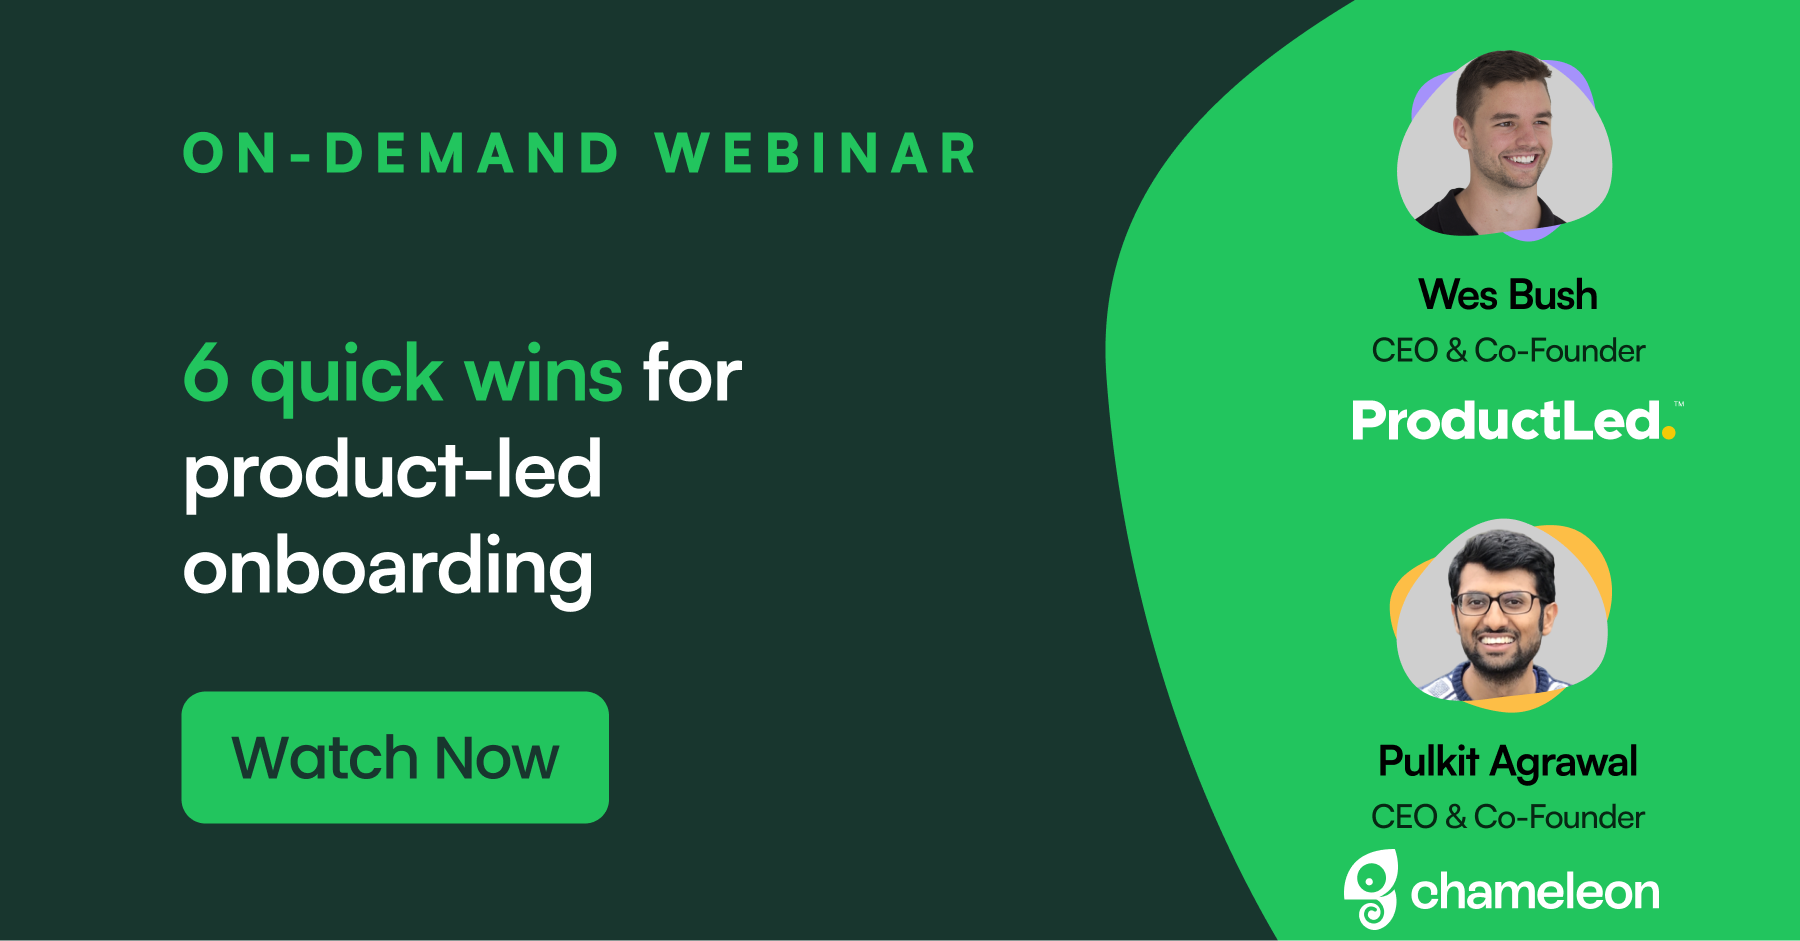 6 quick wins for product-led onboarding